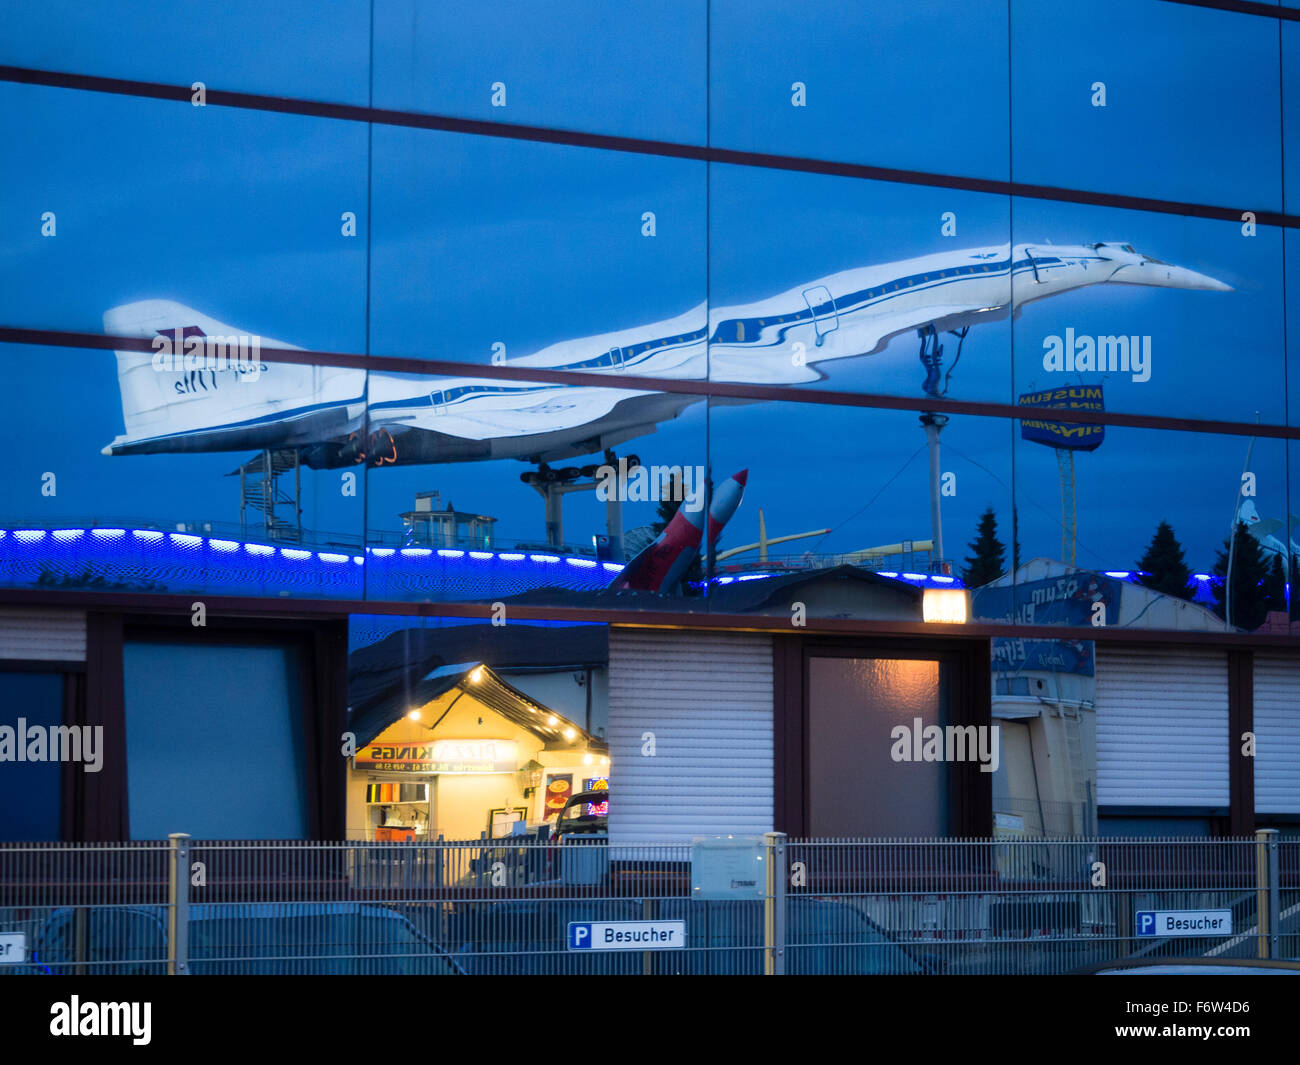 Discarded Russian Tupolev Tu-144 supersonic passenger aircraft at the rooftop of the museum for technology in Sinsheim, Germany. Stock Photo